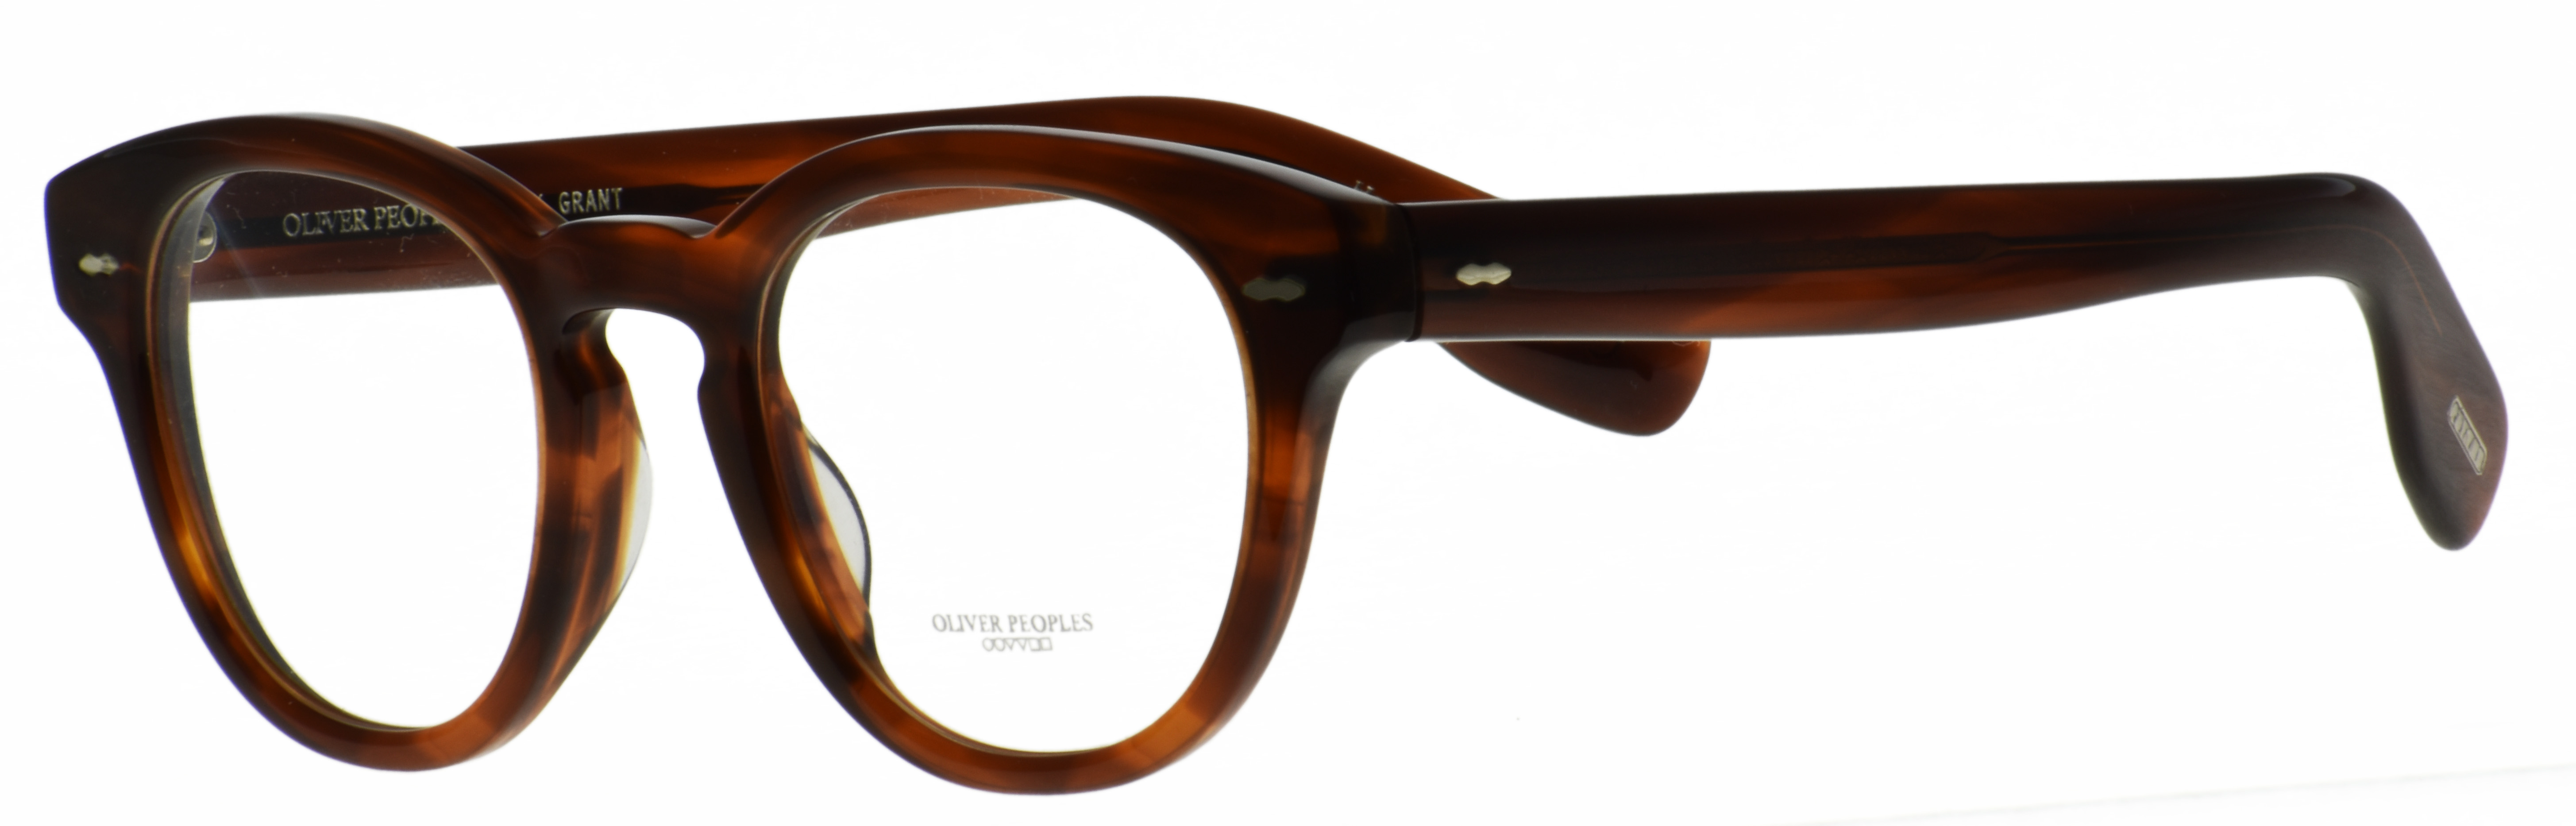 OLIVER PEOPLES CARY GRANT 1679 ￥32,000. 48 02